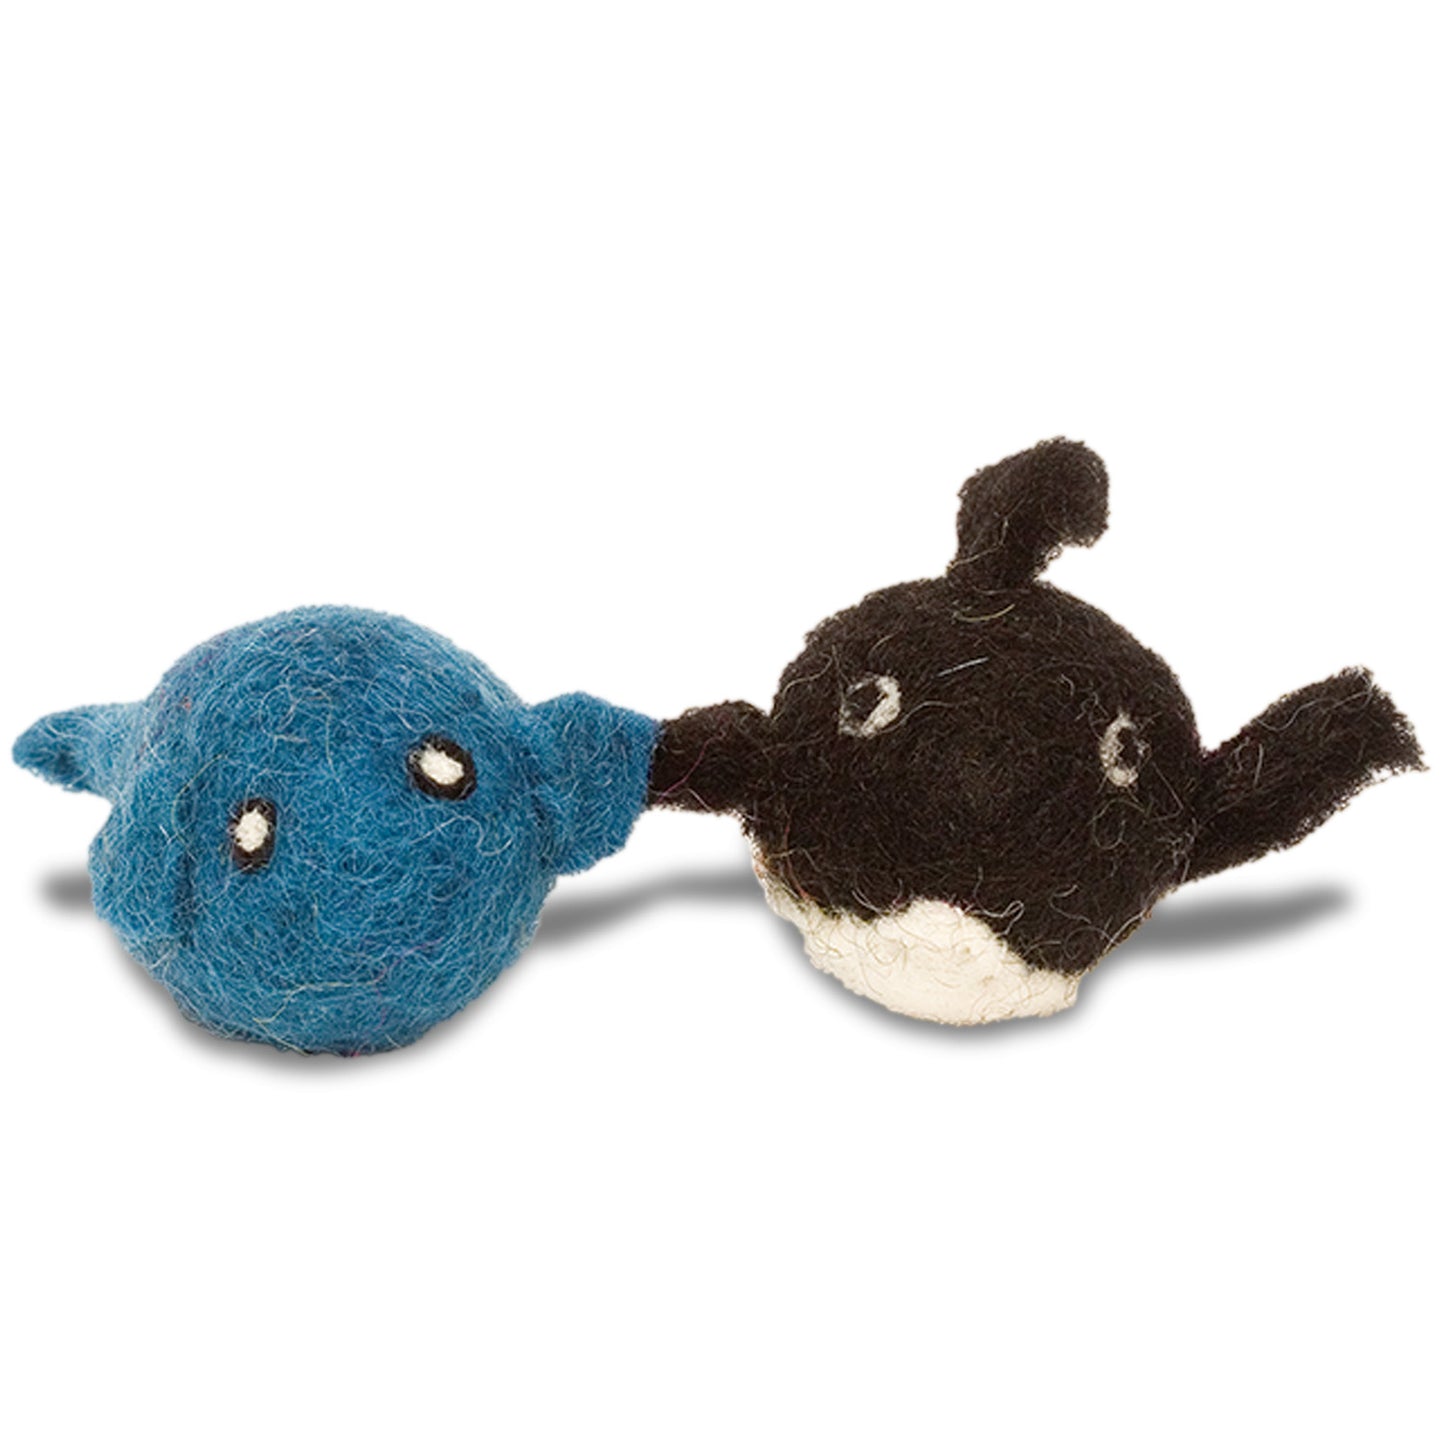 Whale & Orca, Pack of 2 Toys